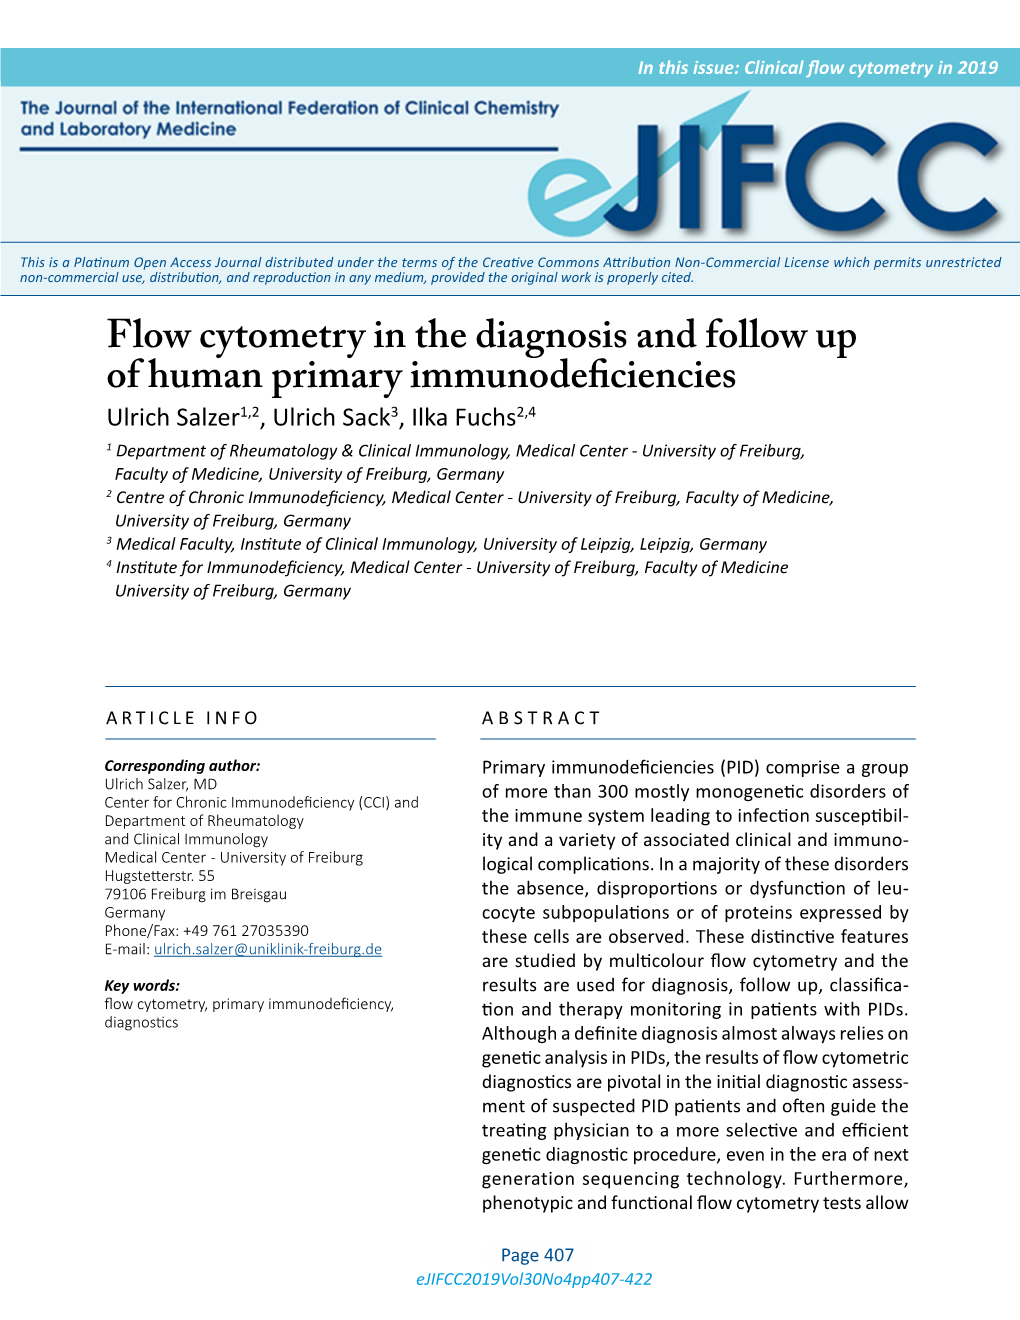 Flow Cytometry in the Diagnosis and Follow up of Human Primary Immunodeficiencies